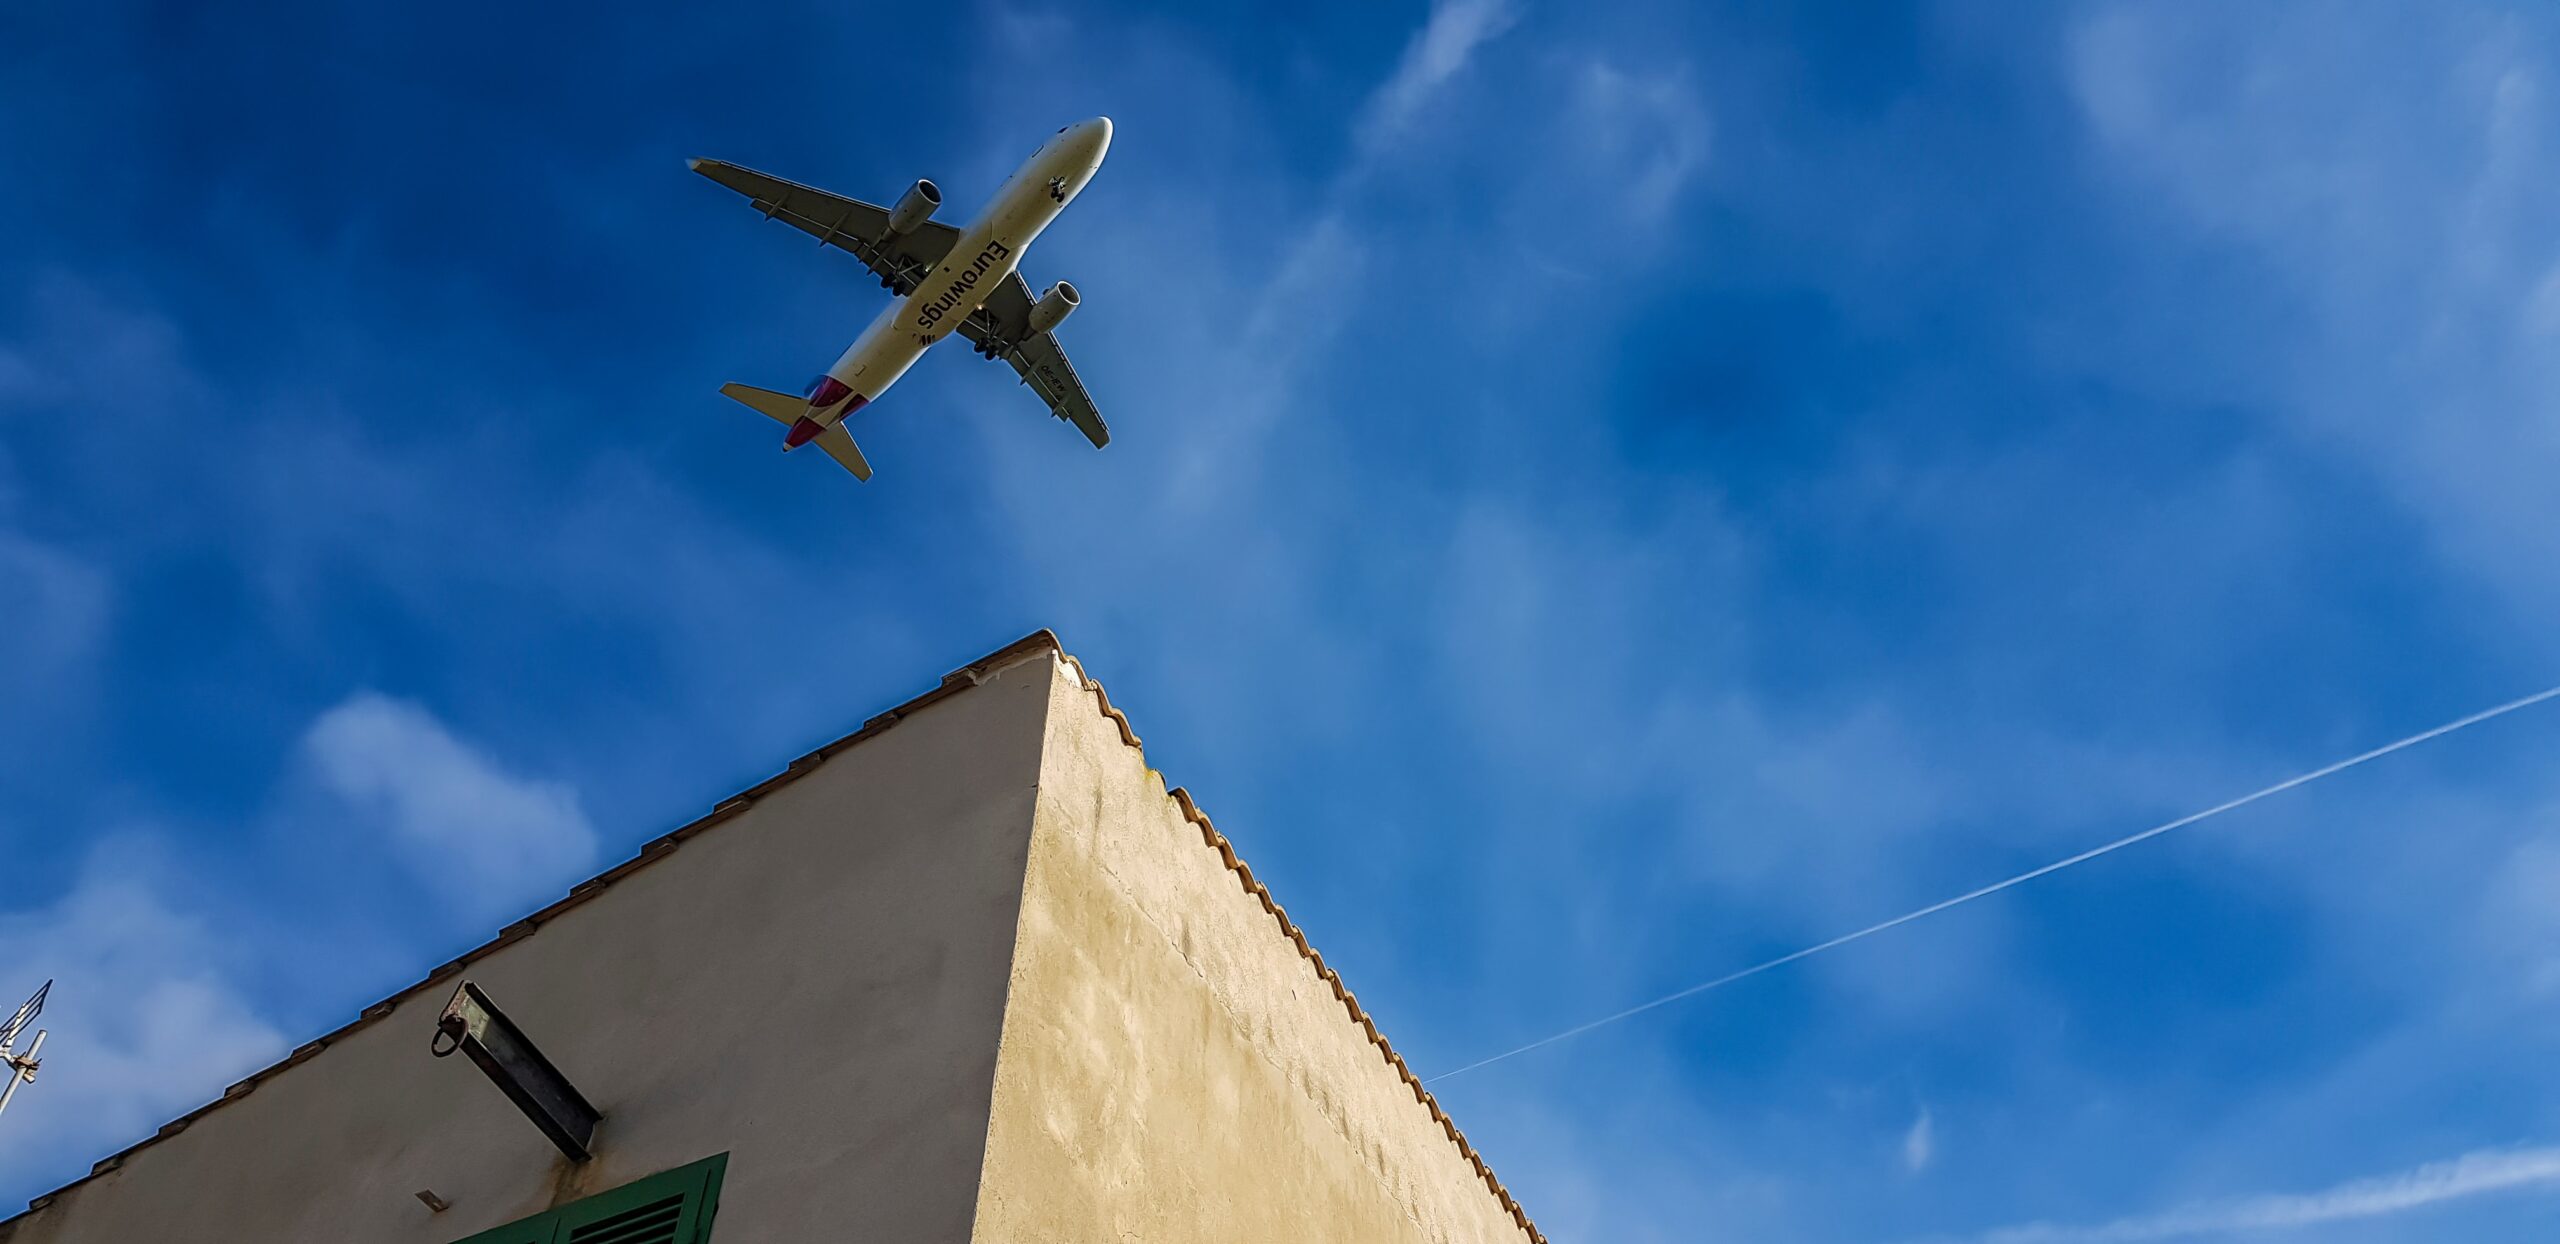 Airplane flying overhead above a building